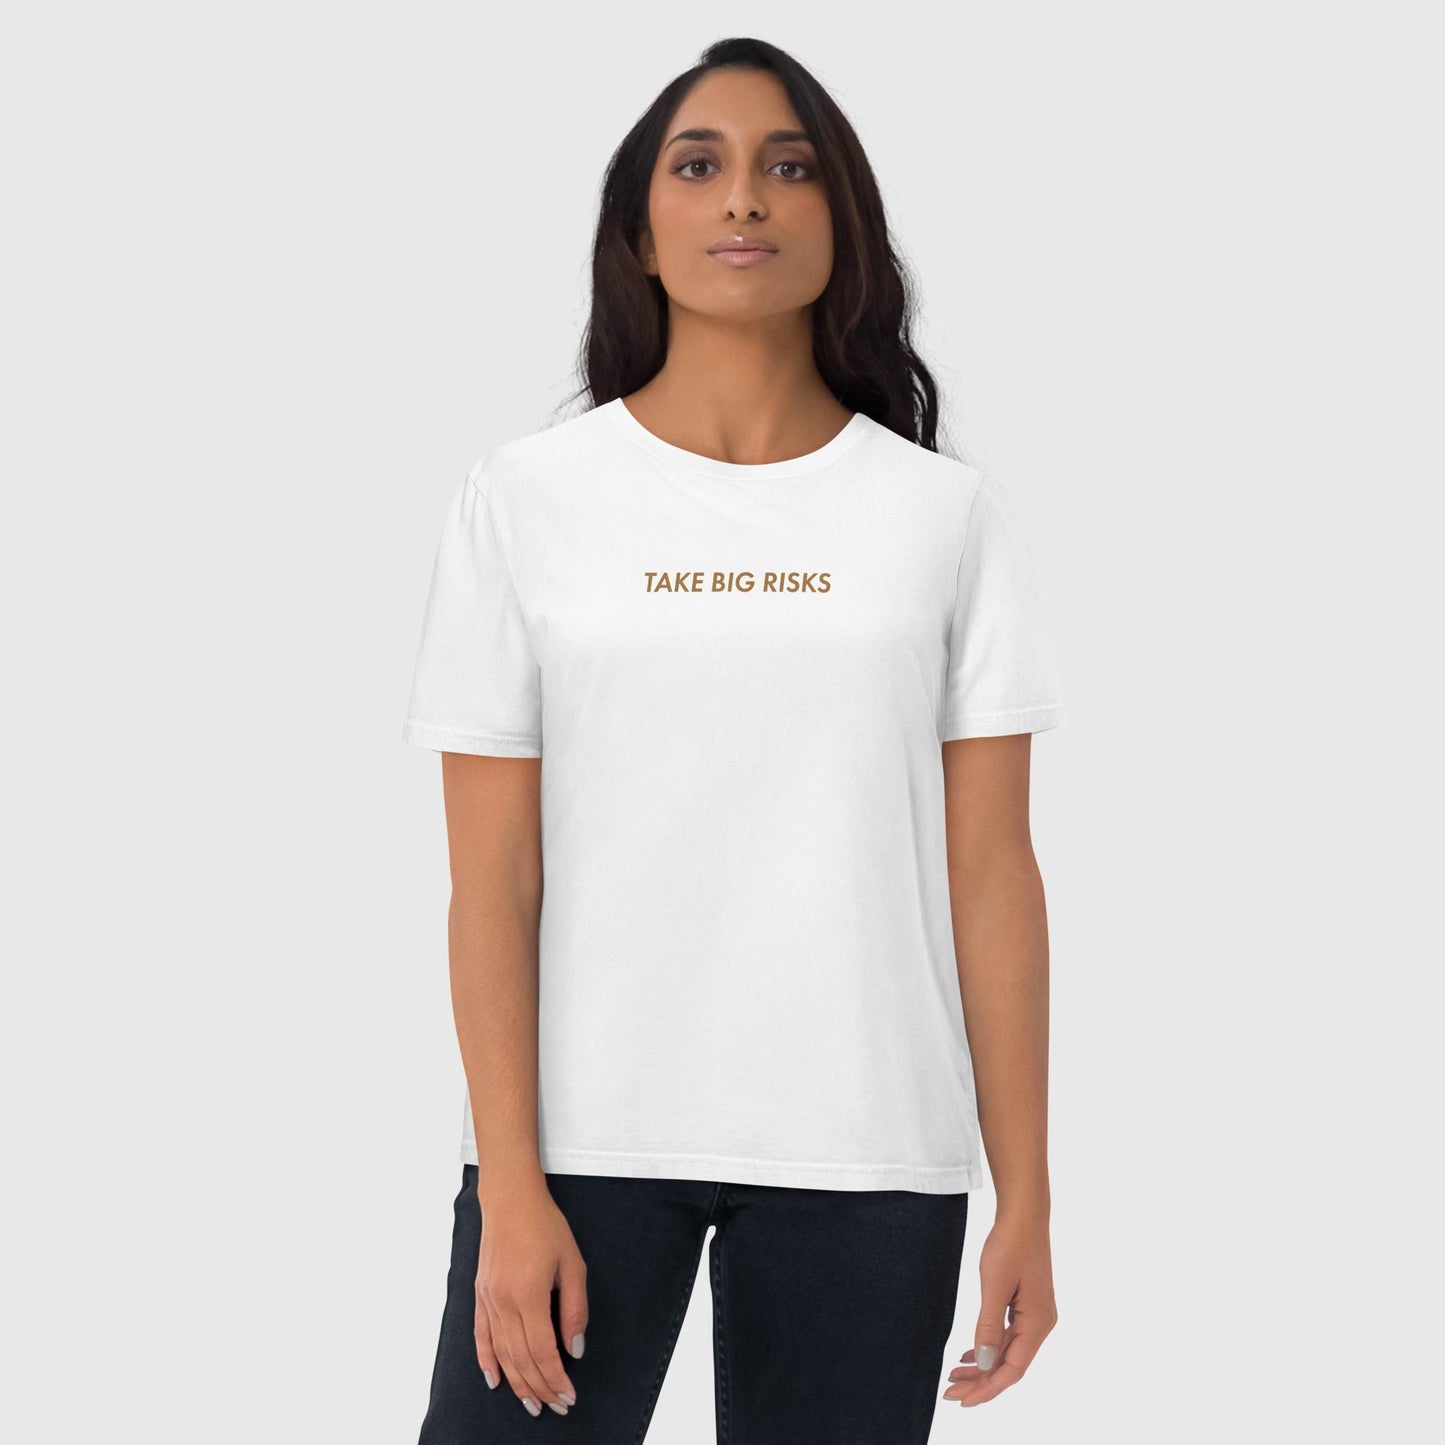 Women's white oversized organic cotton t-shirt that features Bill Gates' quote on success, "Take Big Risks." 